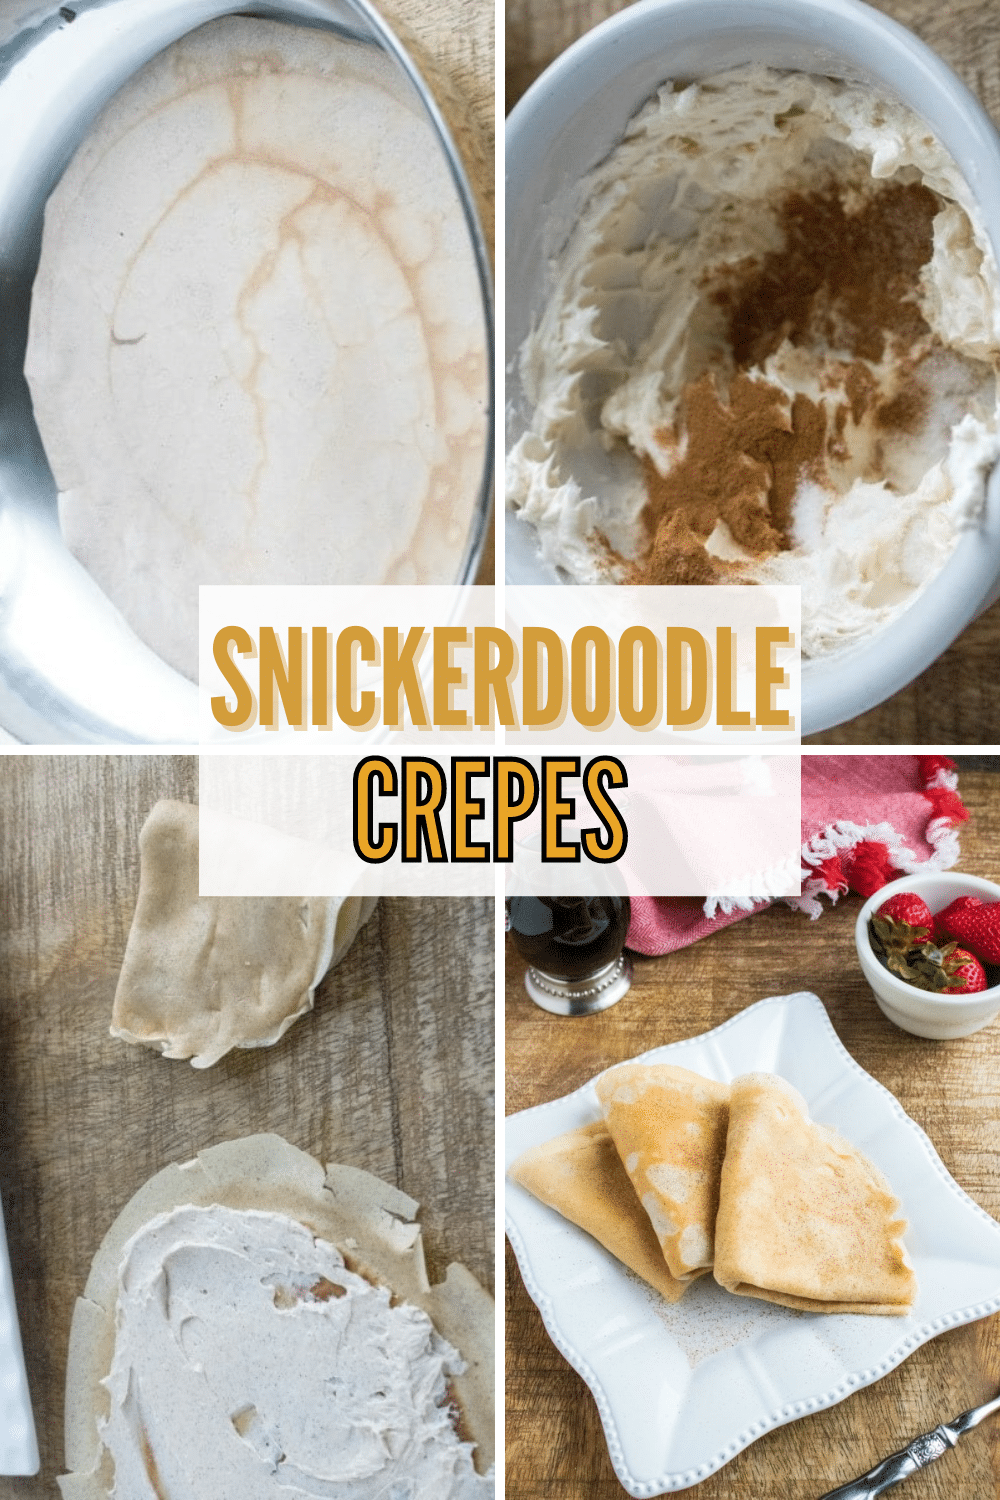 Snickerdoodle Crepes are a sweet breakfast recipe filled with a delightful cinnamon and sugar cream cheese filling. This easy breakfast recipe is absolutely delicious! #breakfast #crepes #snickerdoodles via @wondermomwannab